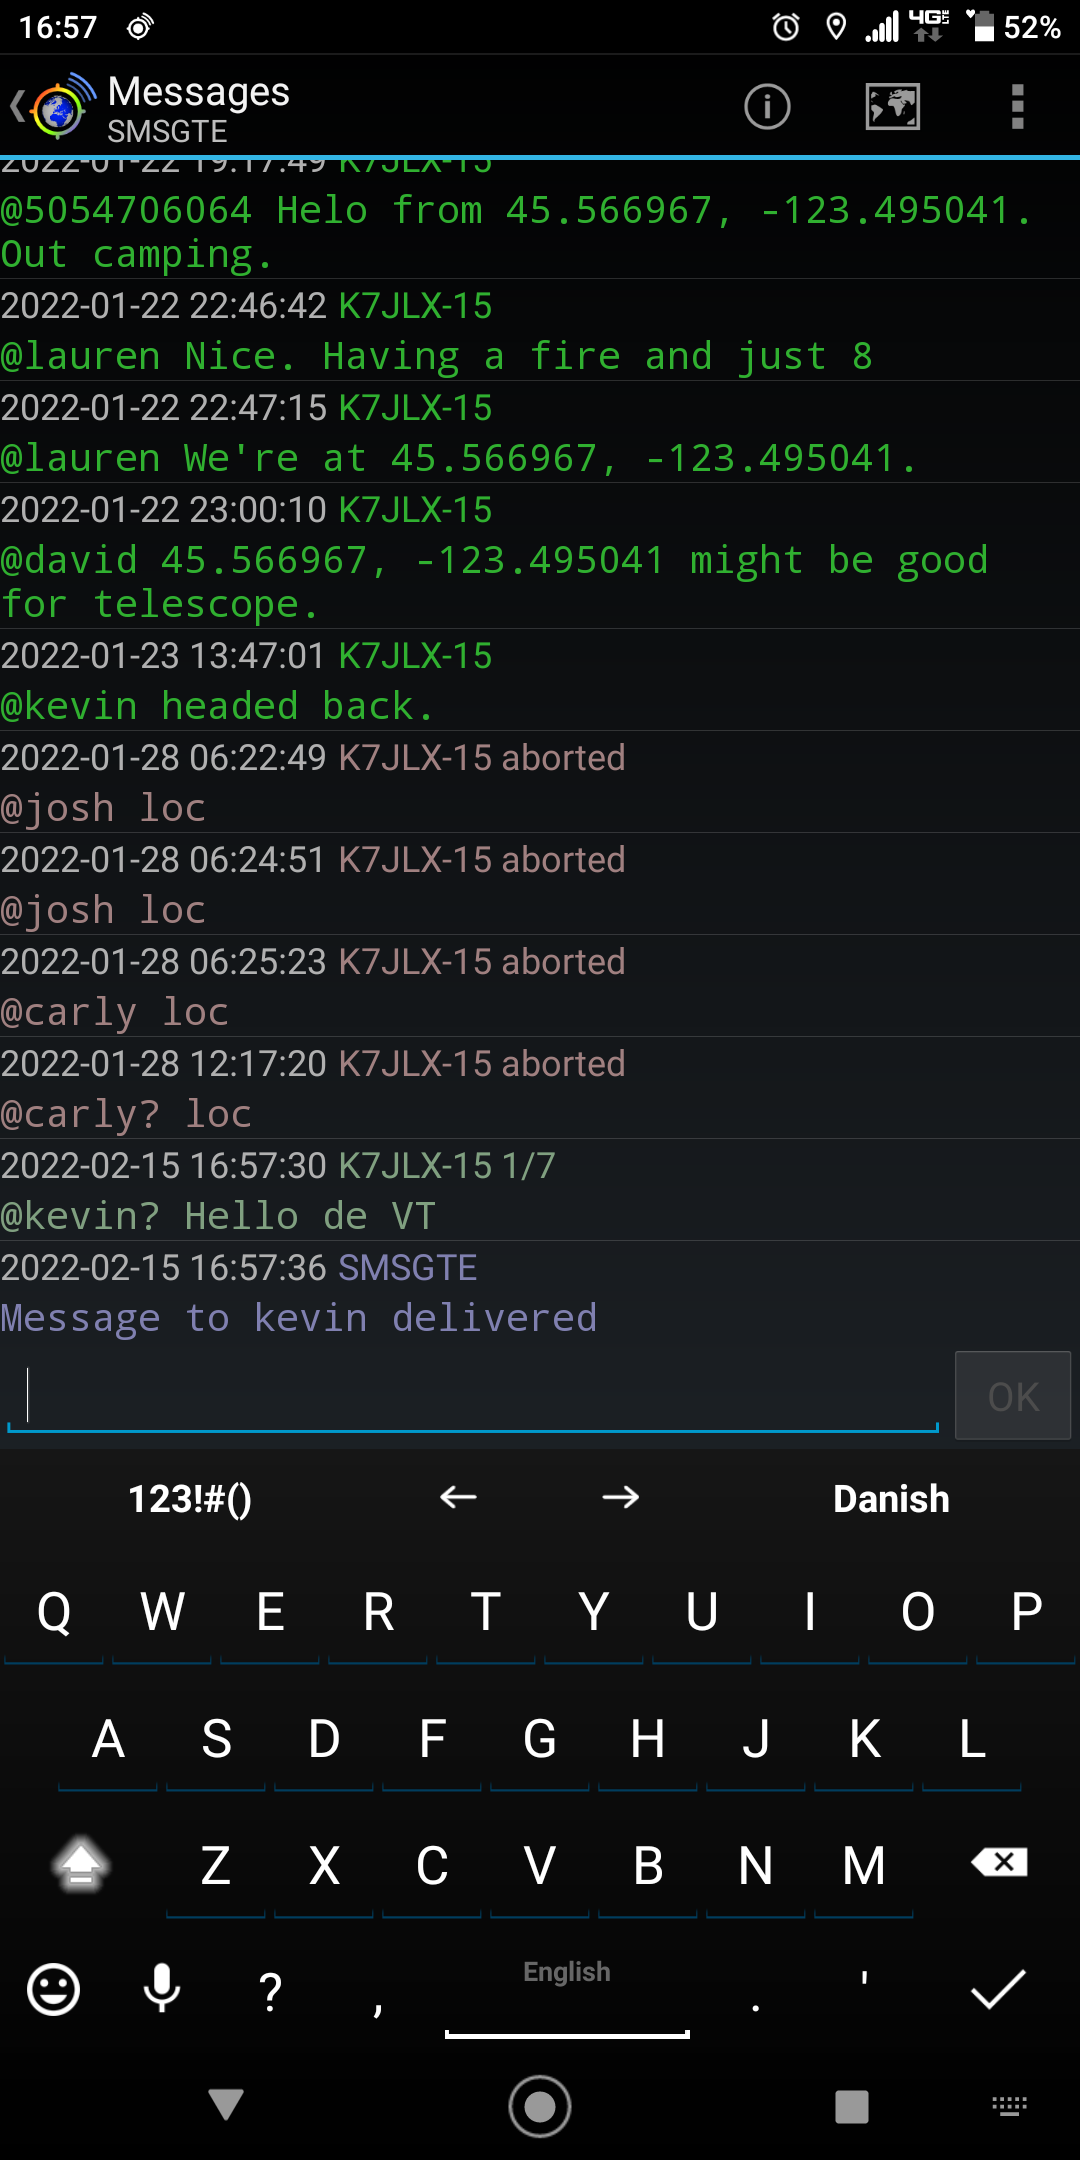 A phone screenshot of APRSDroid showing messages to a station called SMSGTE saying "Hello de VT" being sent to a user called "kevin" and a message reading "Message to kevin delivered".